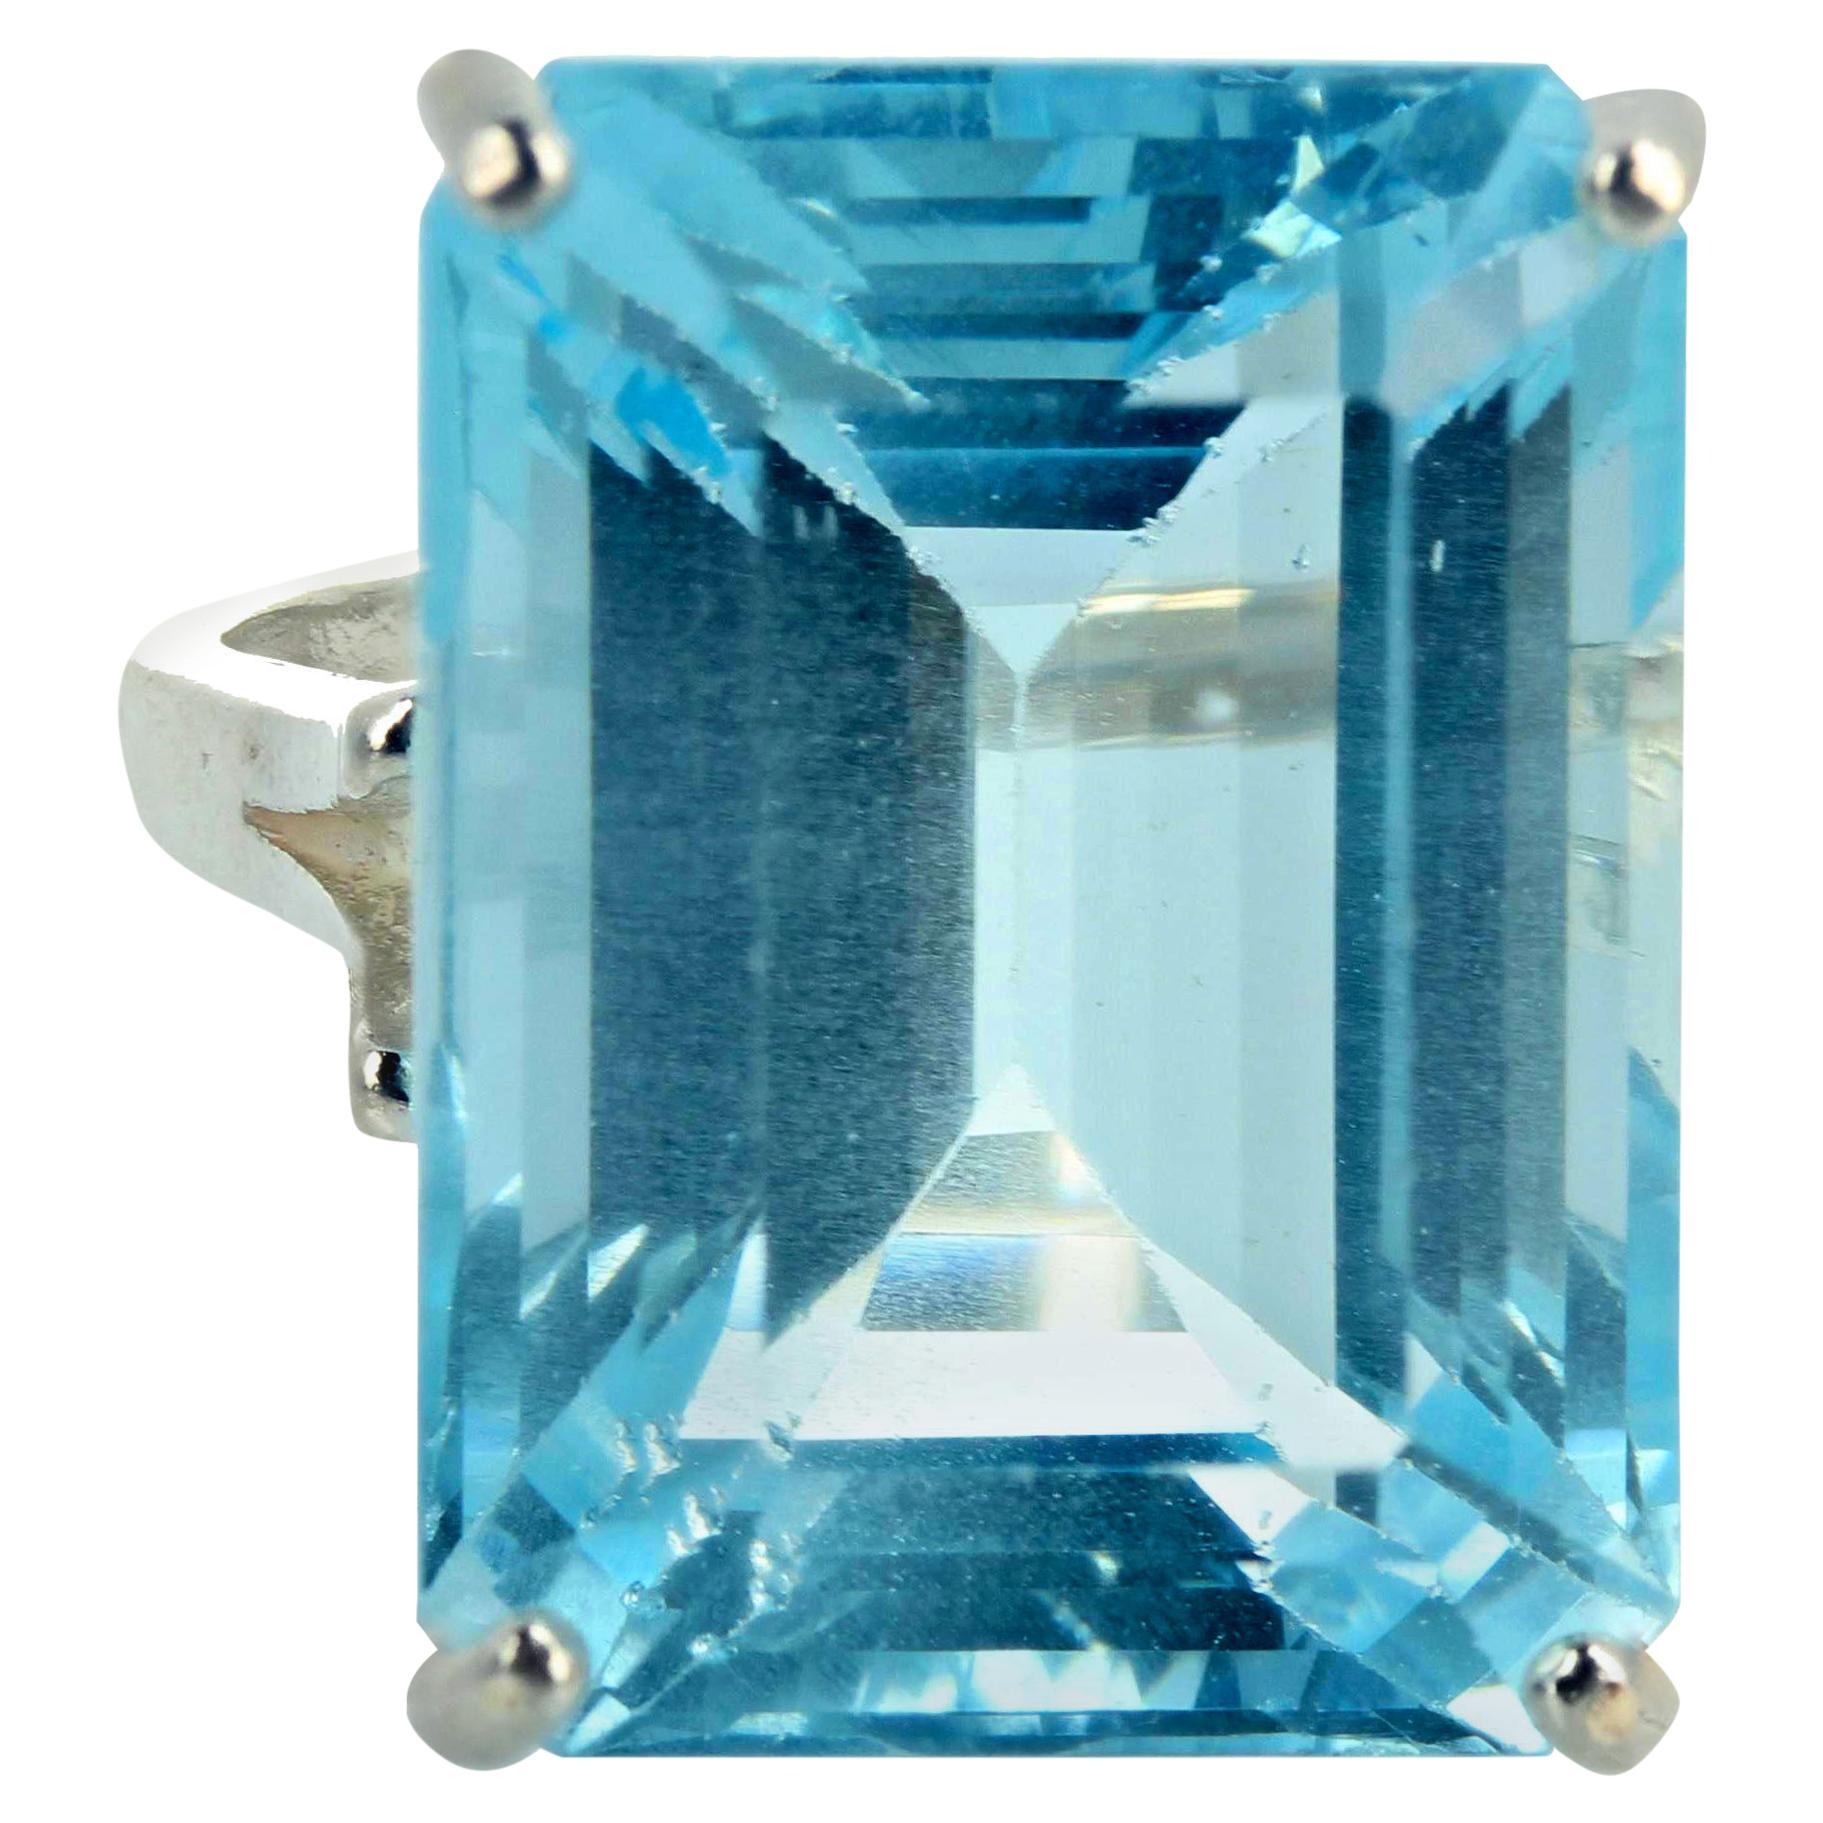 AJD Gorgeous REAL Cushion Cut 18 Ct Natural Aquamarine Silver Solitaire Ring